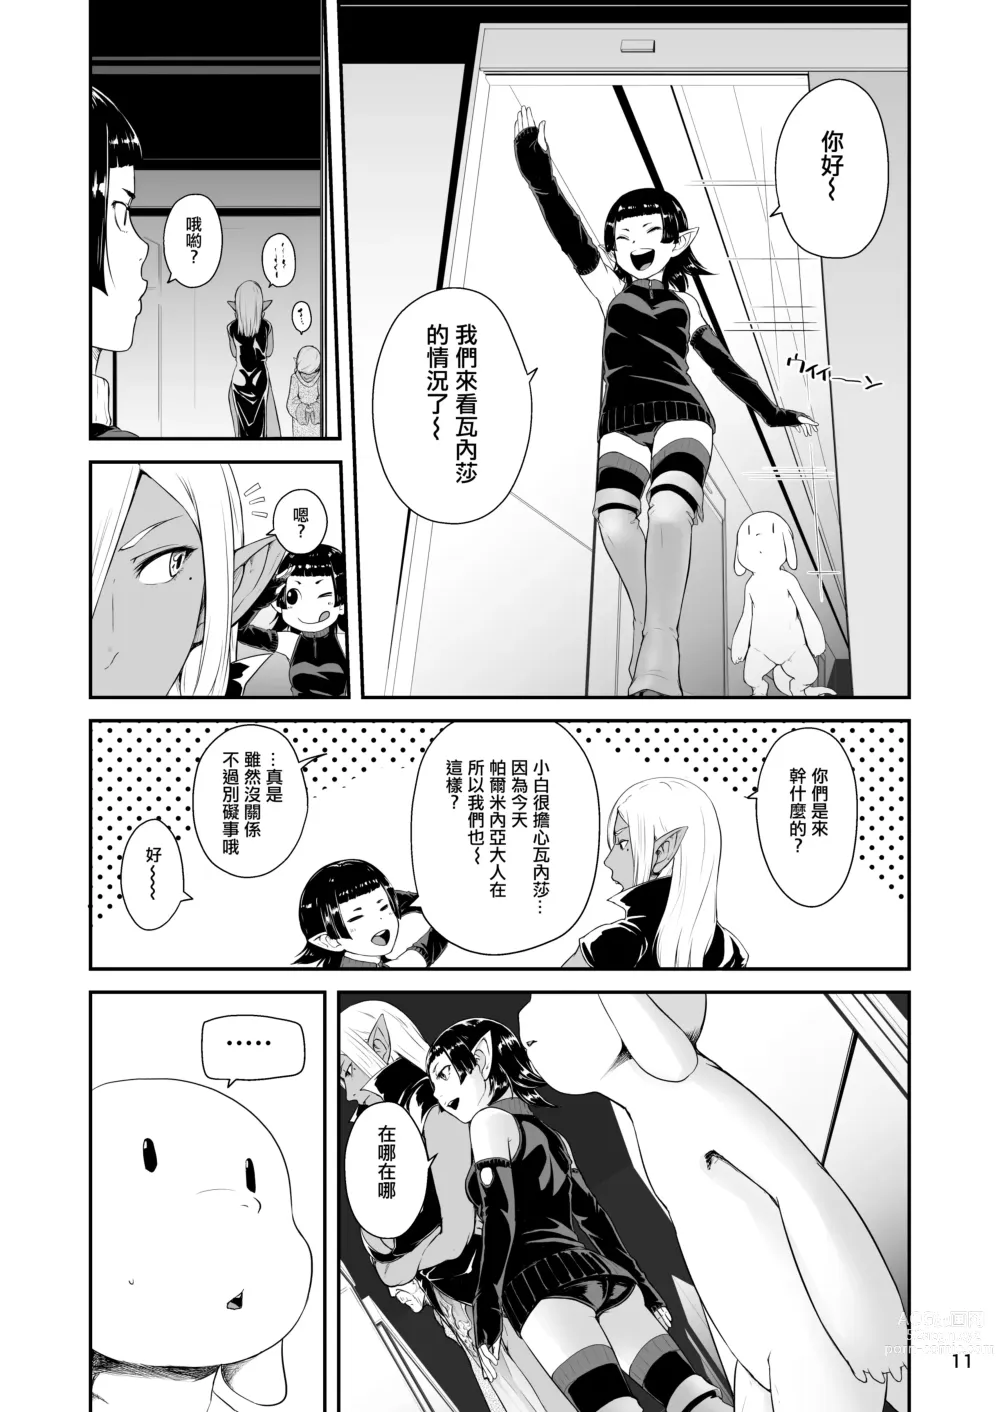 Page 12 of doujinshi 觸手訓練師! Episode 6